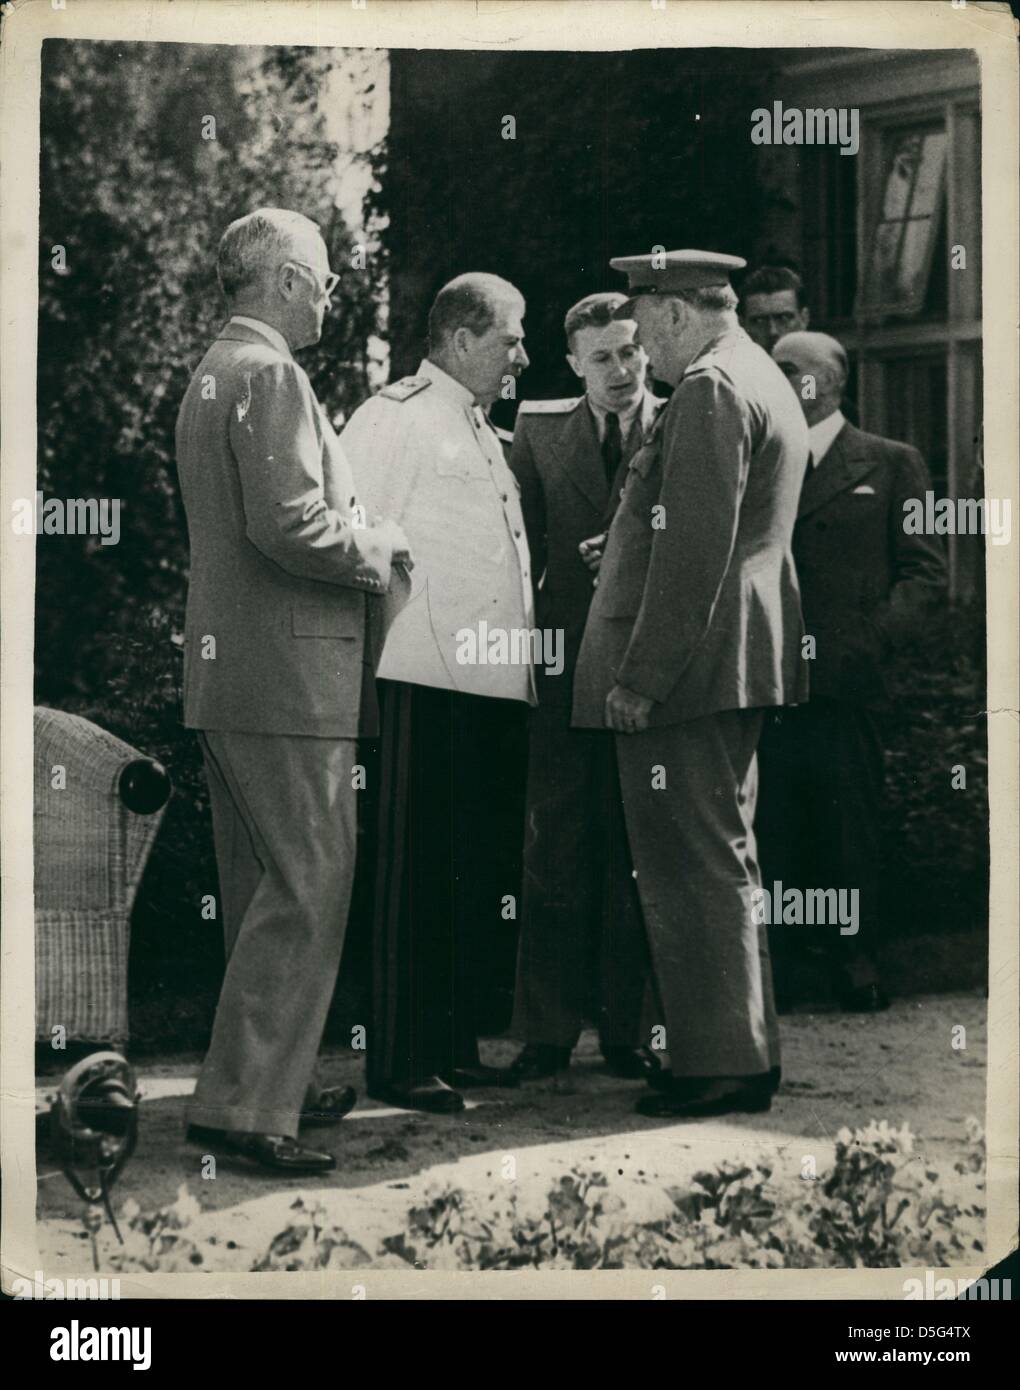 Jul 17, 1945 - Postdam, Germany - US President HARRY S. TRUMAN (L) with Russian Marshal JOSEPH STALIN (C), and British Prime Minister Sir WINSTON CHURCHILL at the Potsdam Conference. The 'Big Three' gathered to decide how to administer punishment to the defeated Nazi Germany, and to establish the post-war order. (Credit Image: © Keystone Pictures USA/ZUMAPRESS.com) Stock Photo